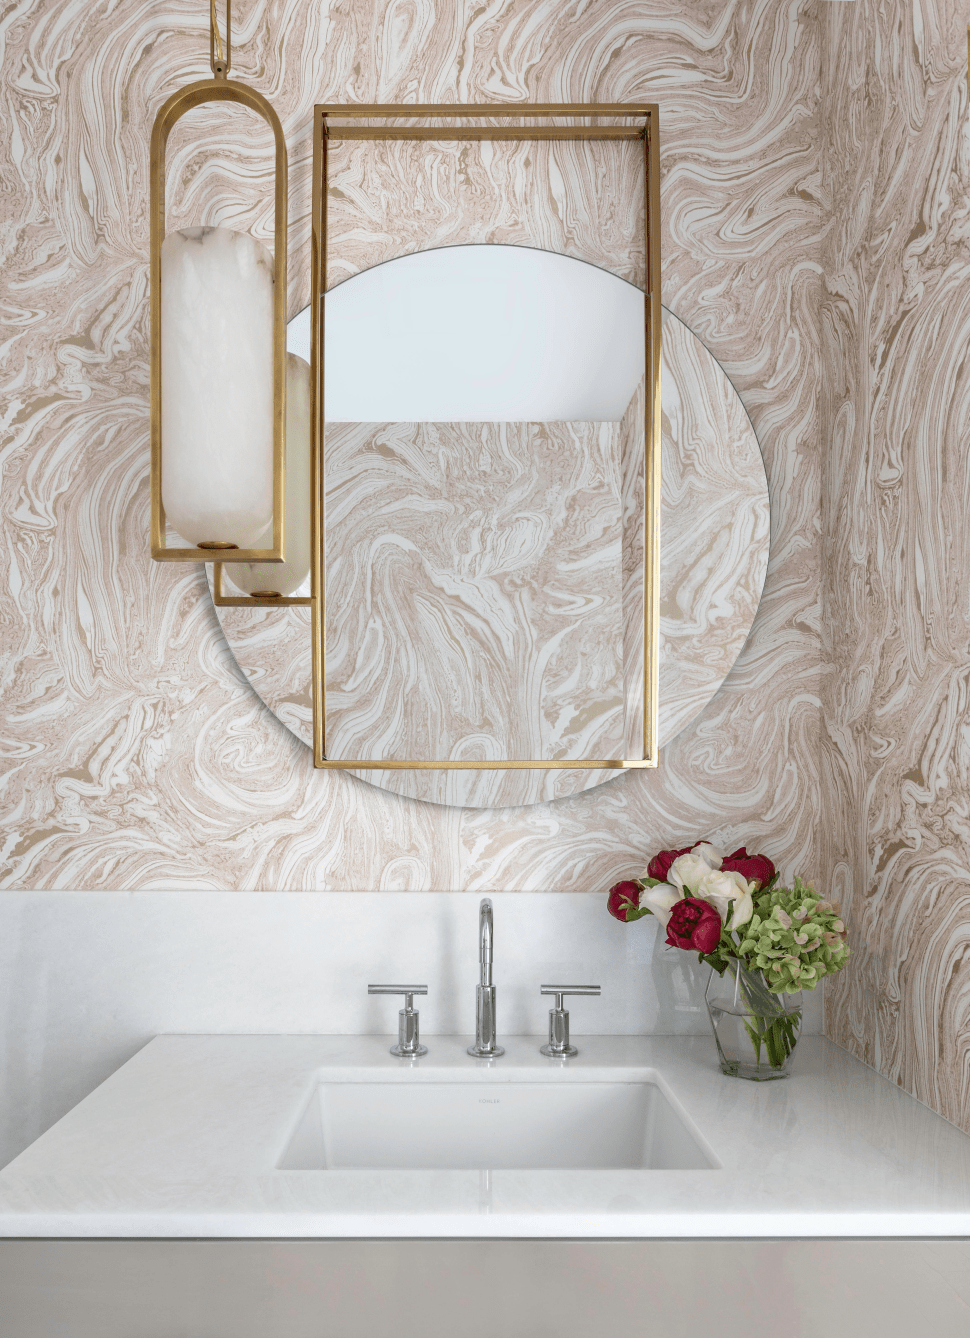 Elegant powder bath with round mirror, patterned wallpaper,  copper lights and mirror frame.